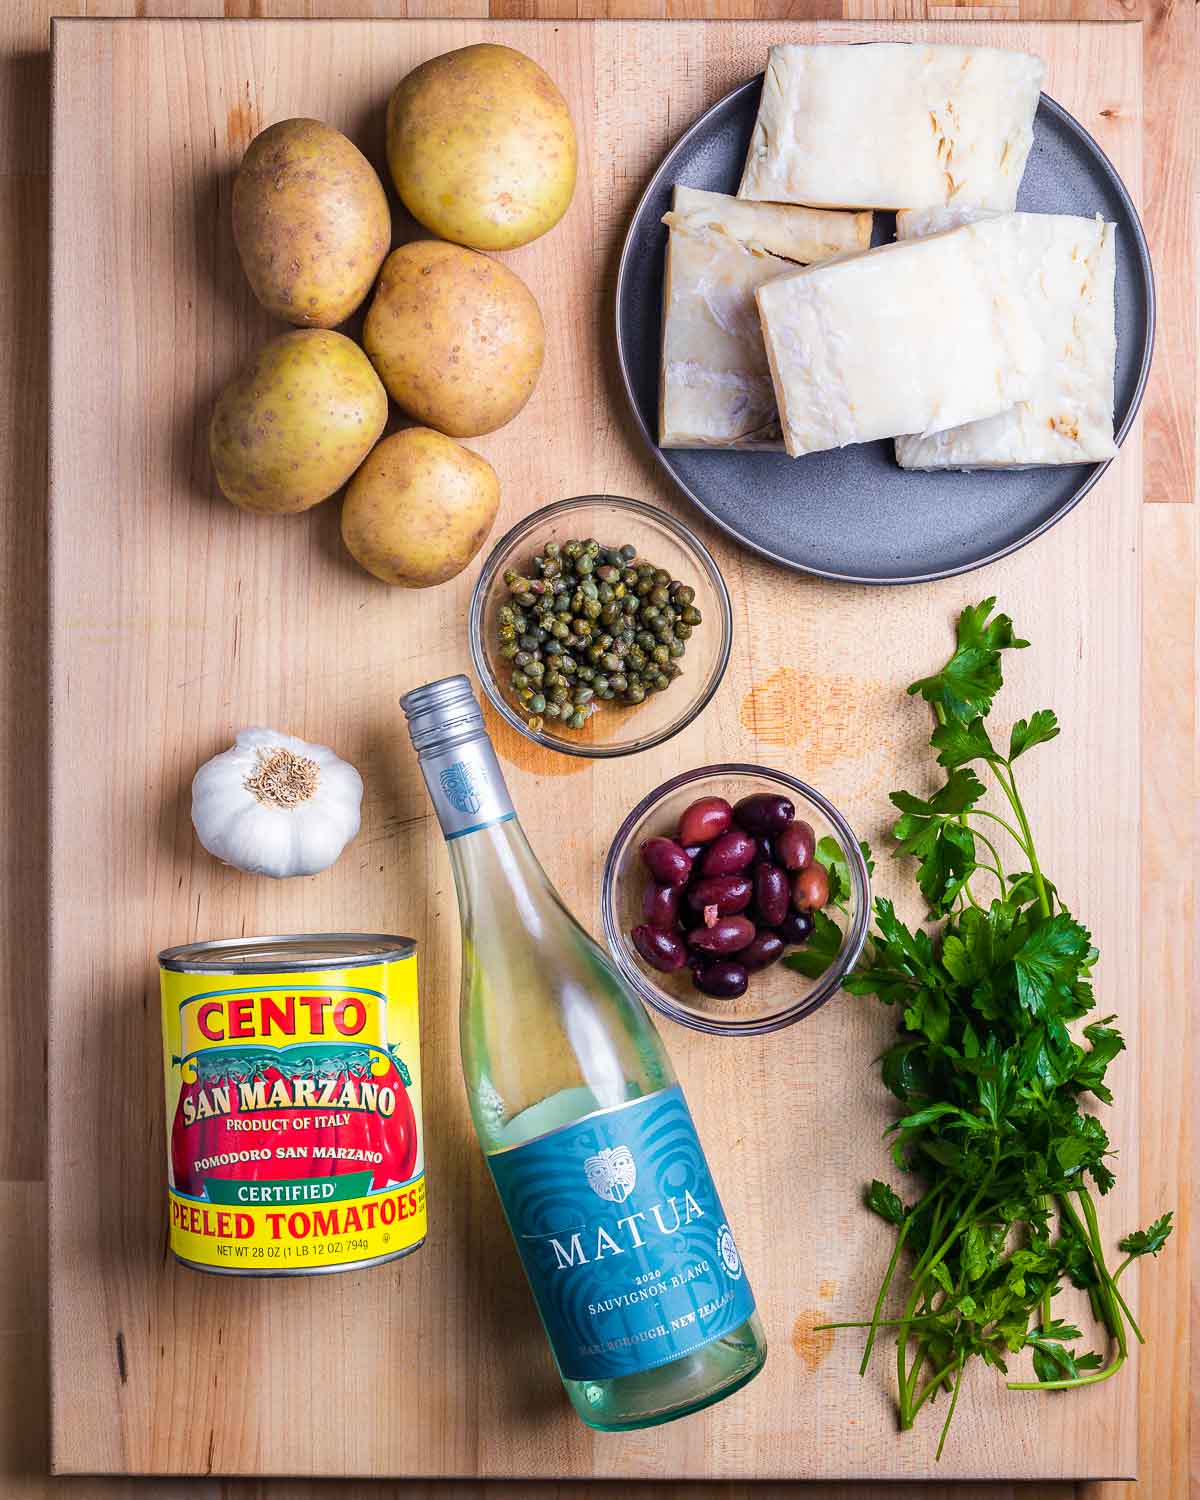 Ingredients shown: potatoes, baccala, capers, garlic, tomatoes, white wine, olives, and parsley.